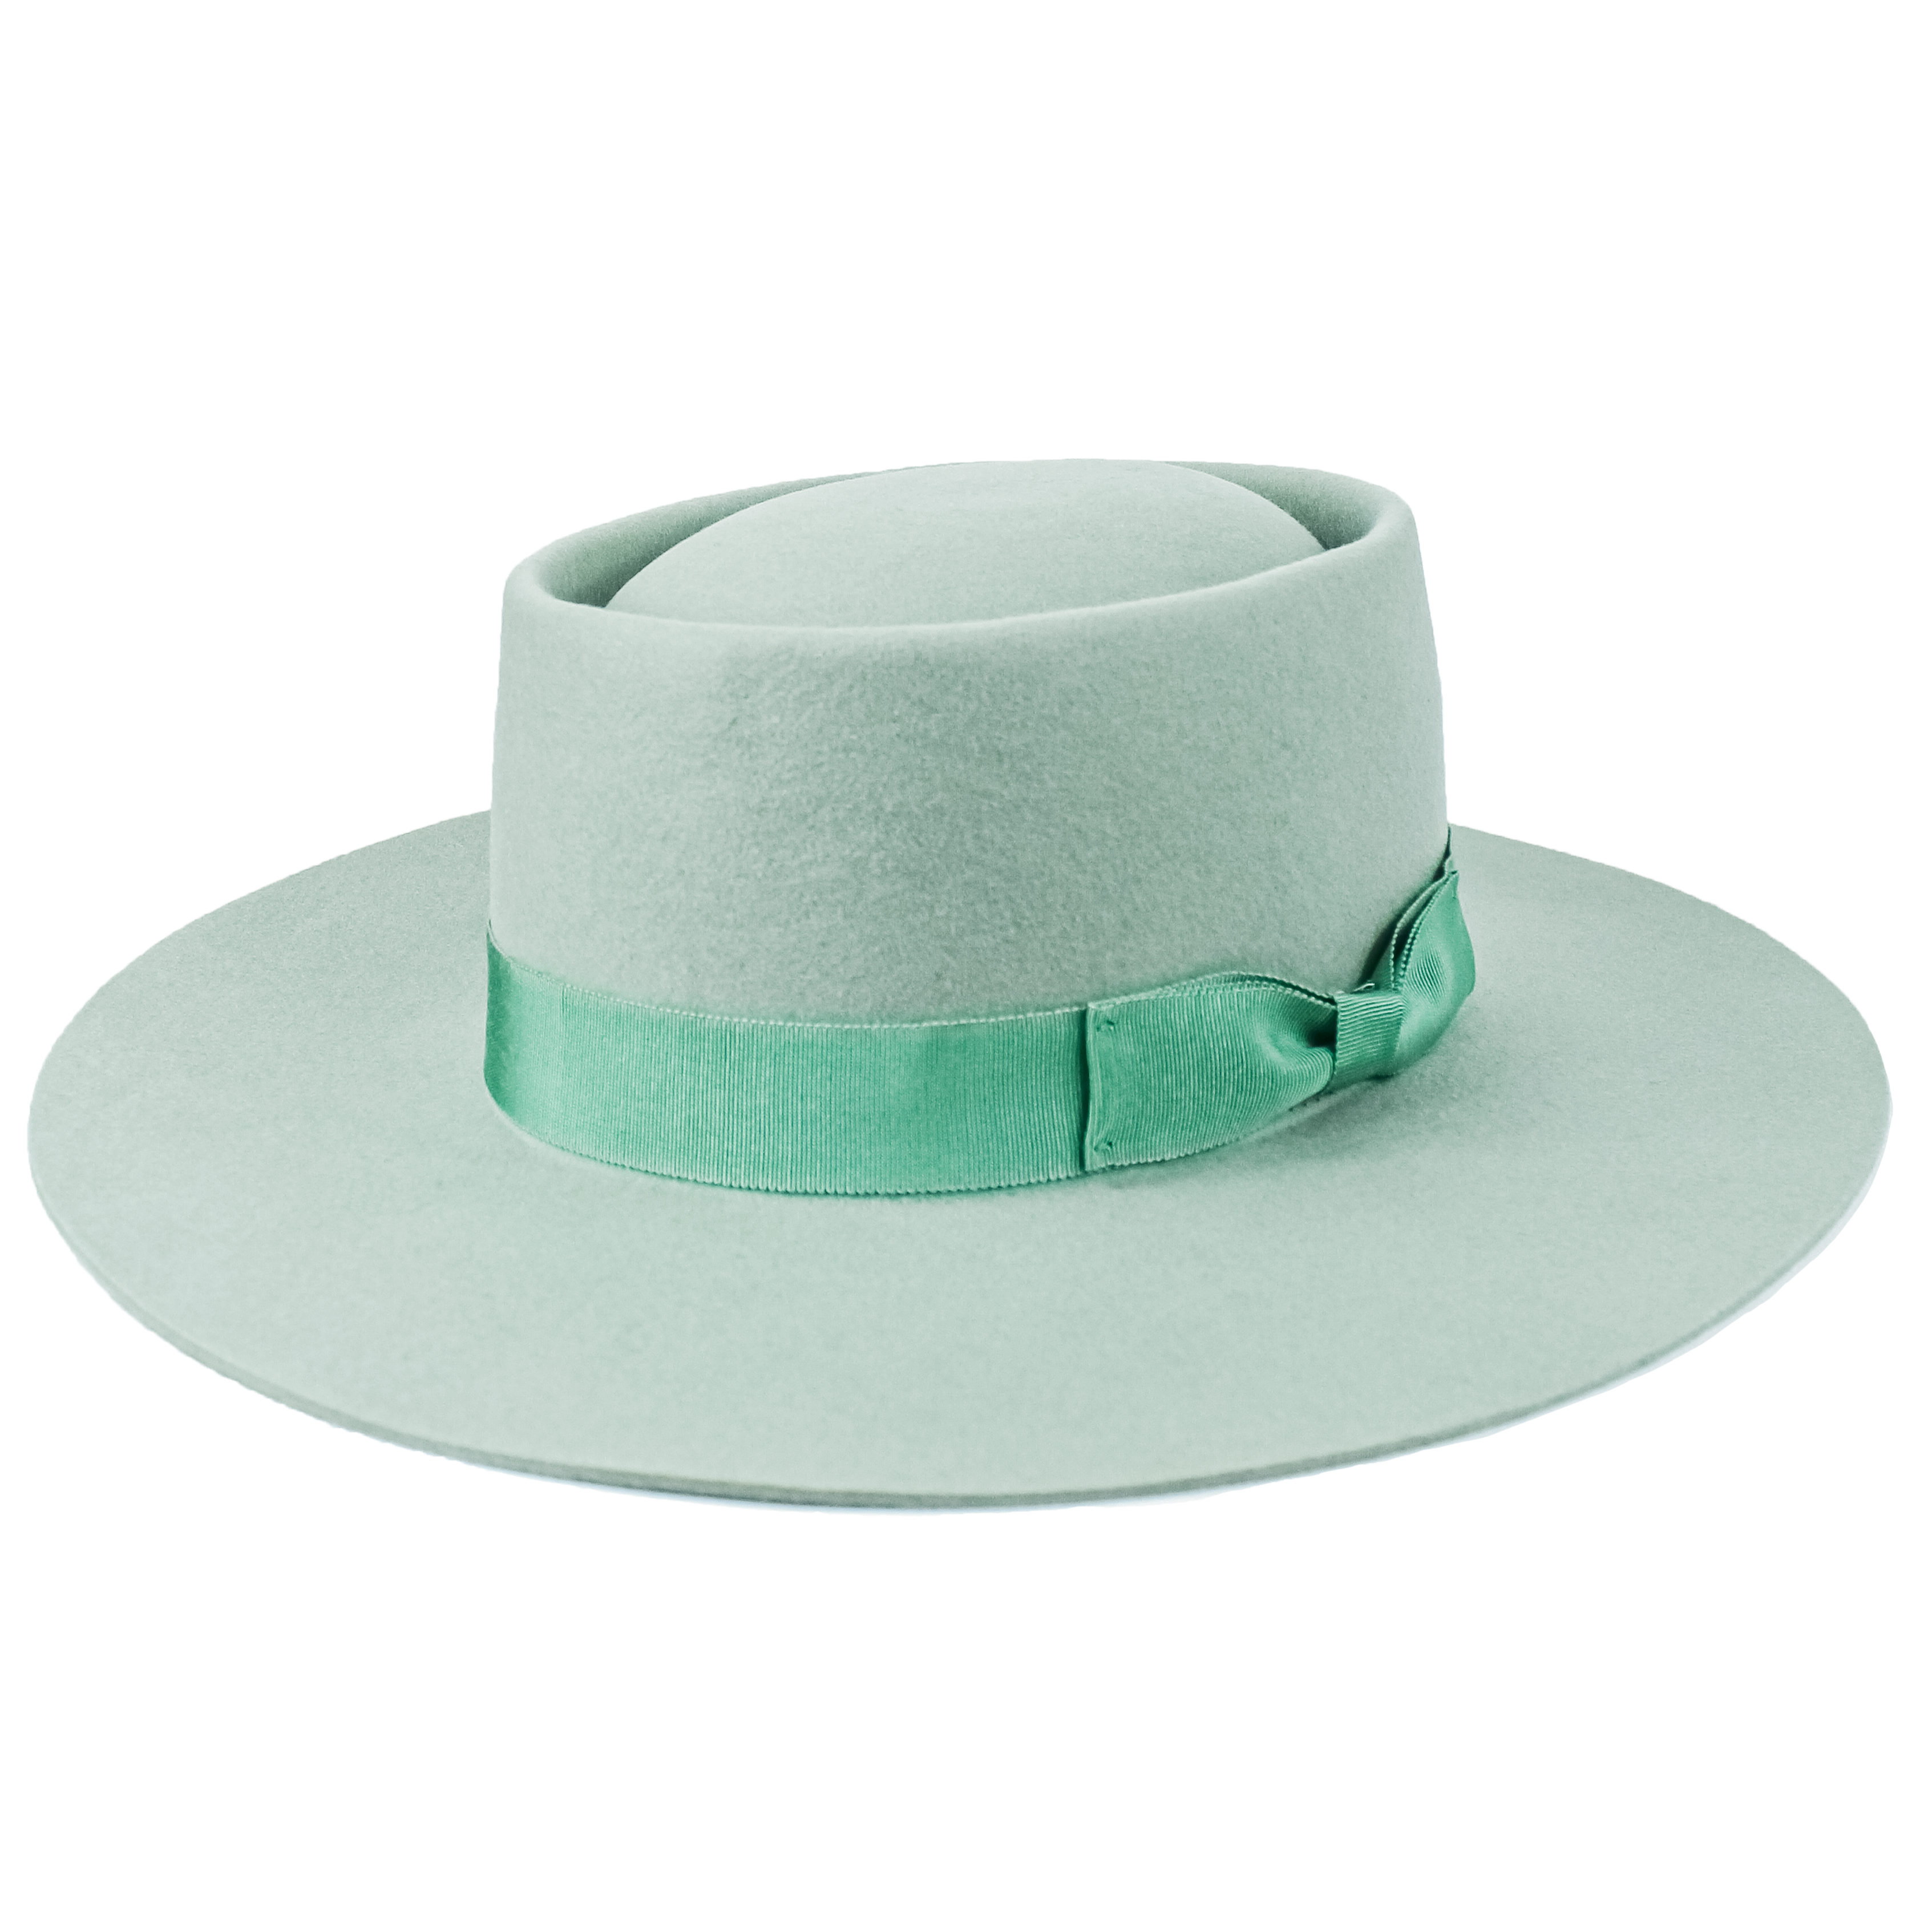 Kayo Boater Hat - Mint Green